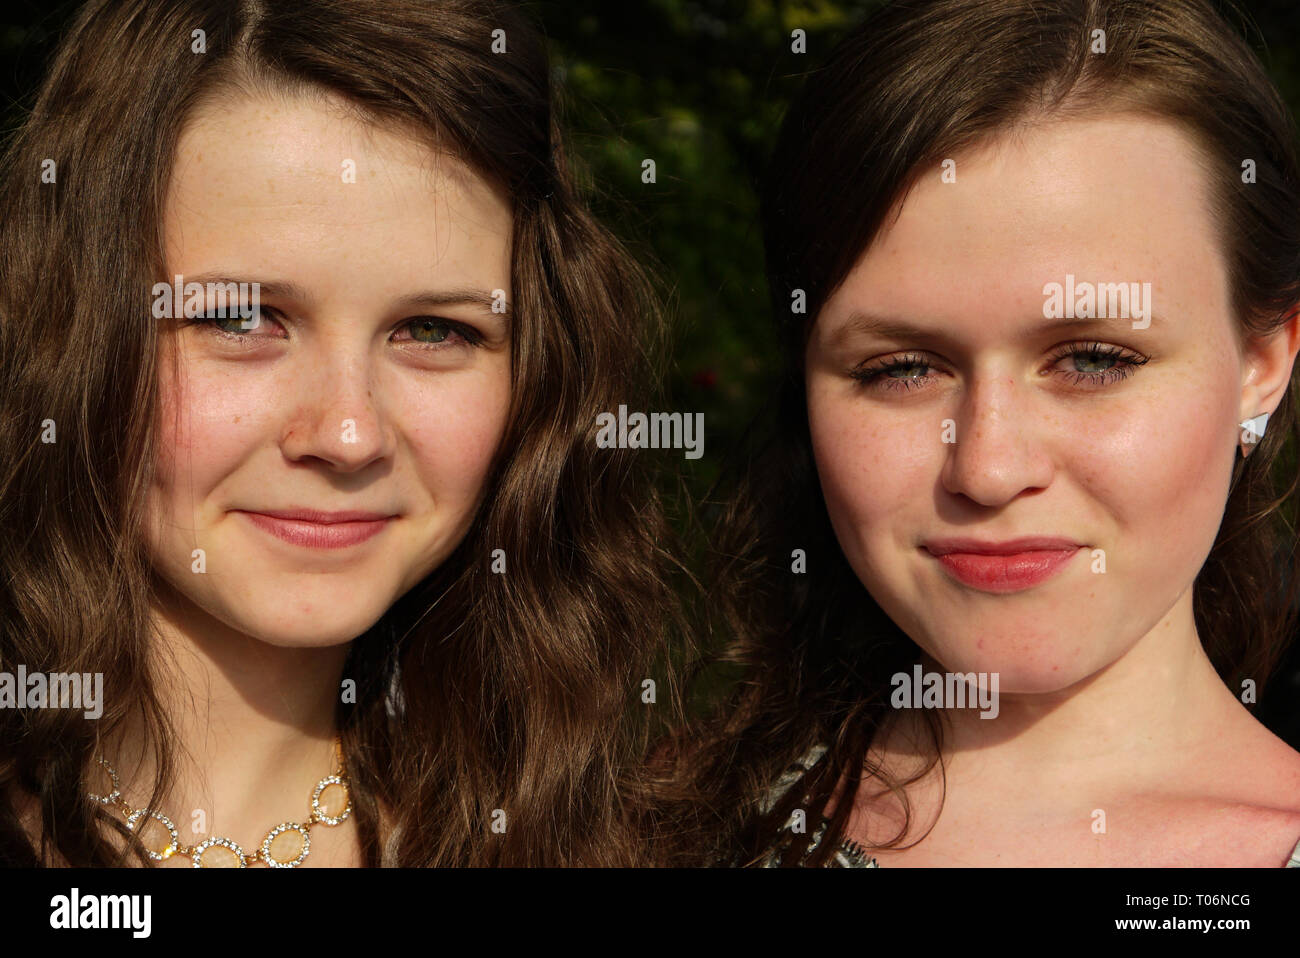 Two young girls at a prom, close-up of faces, UK Stock Photo